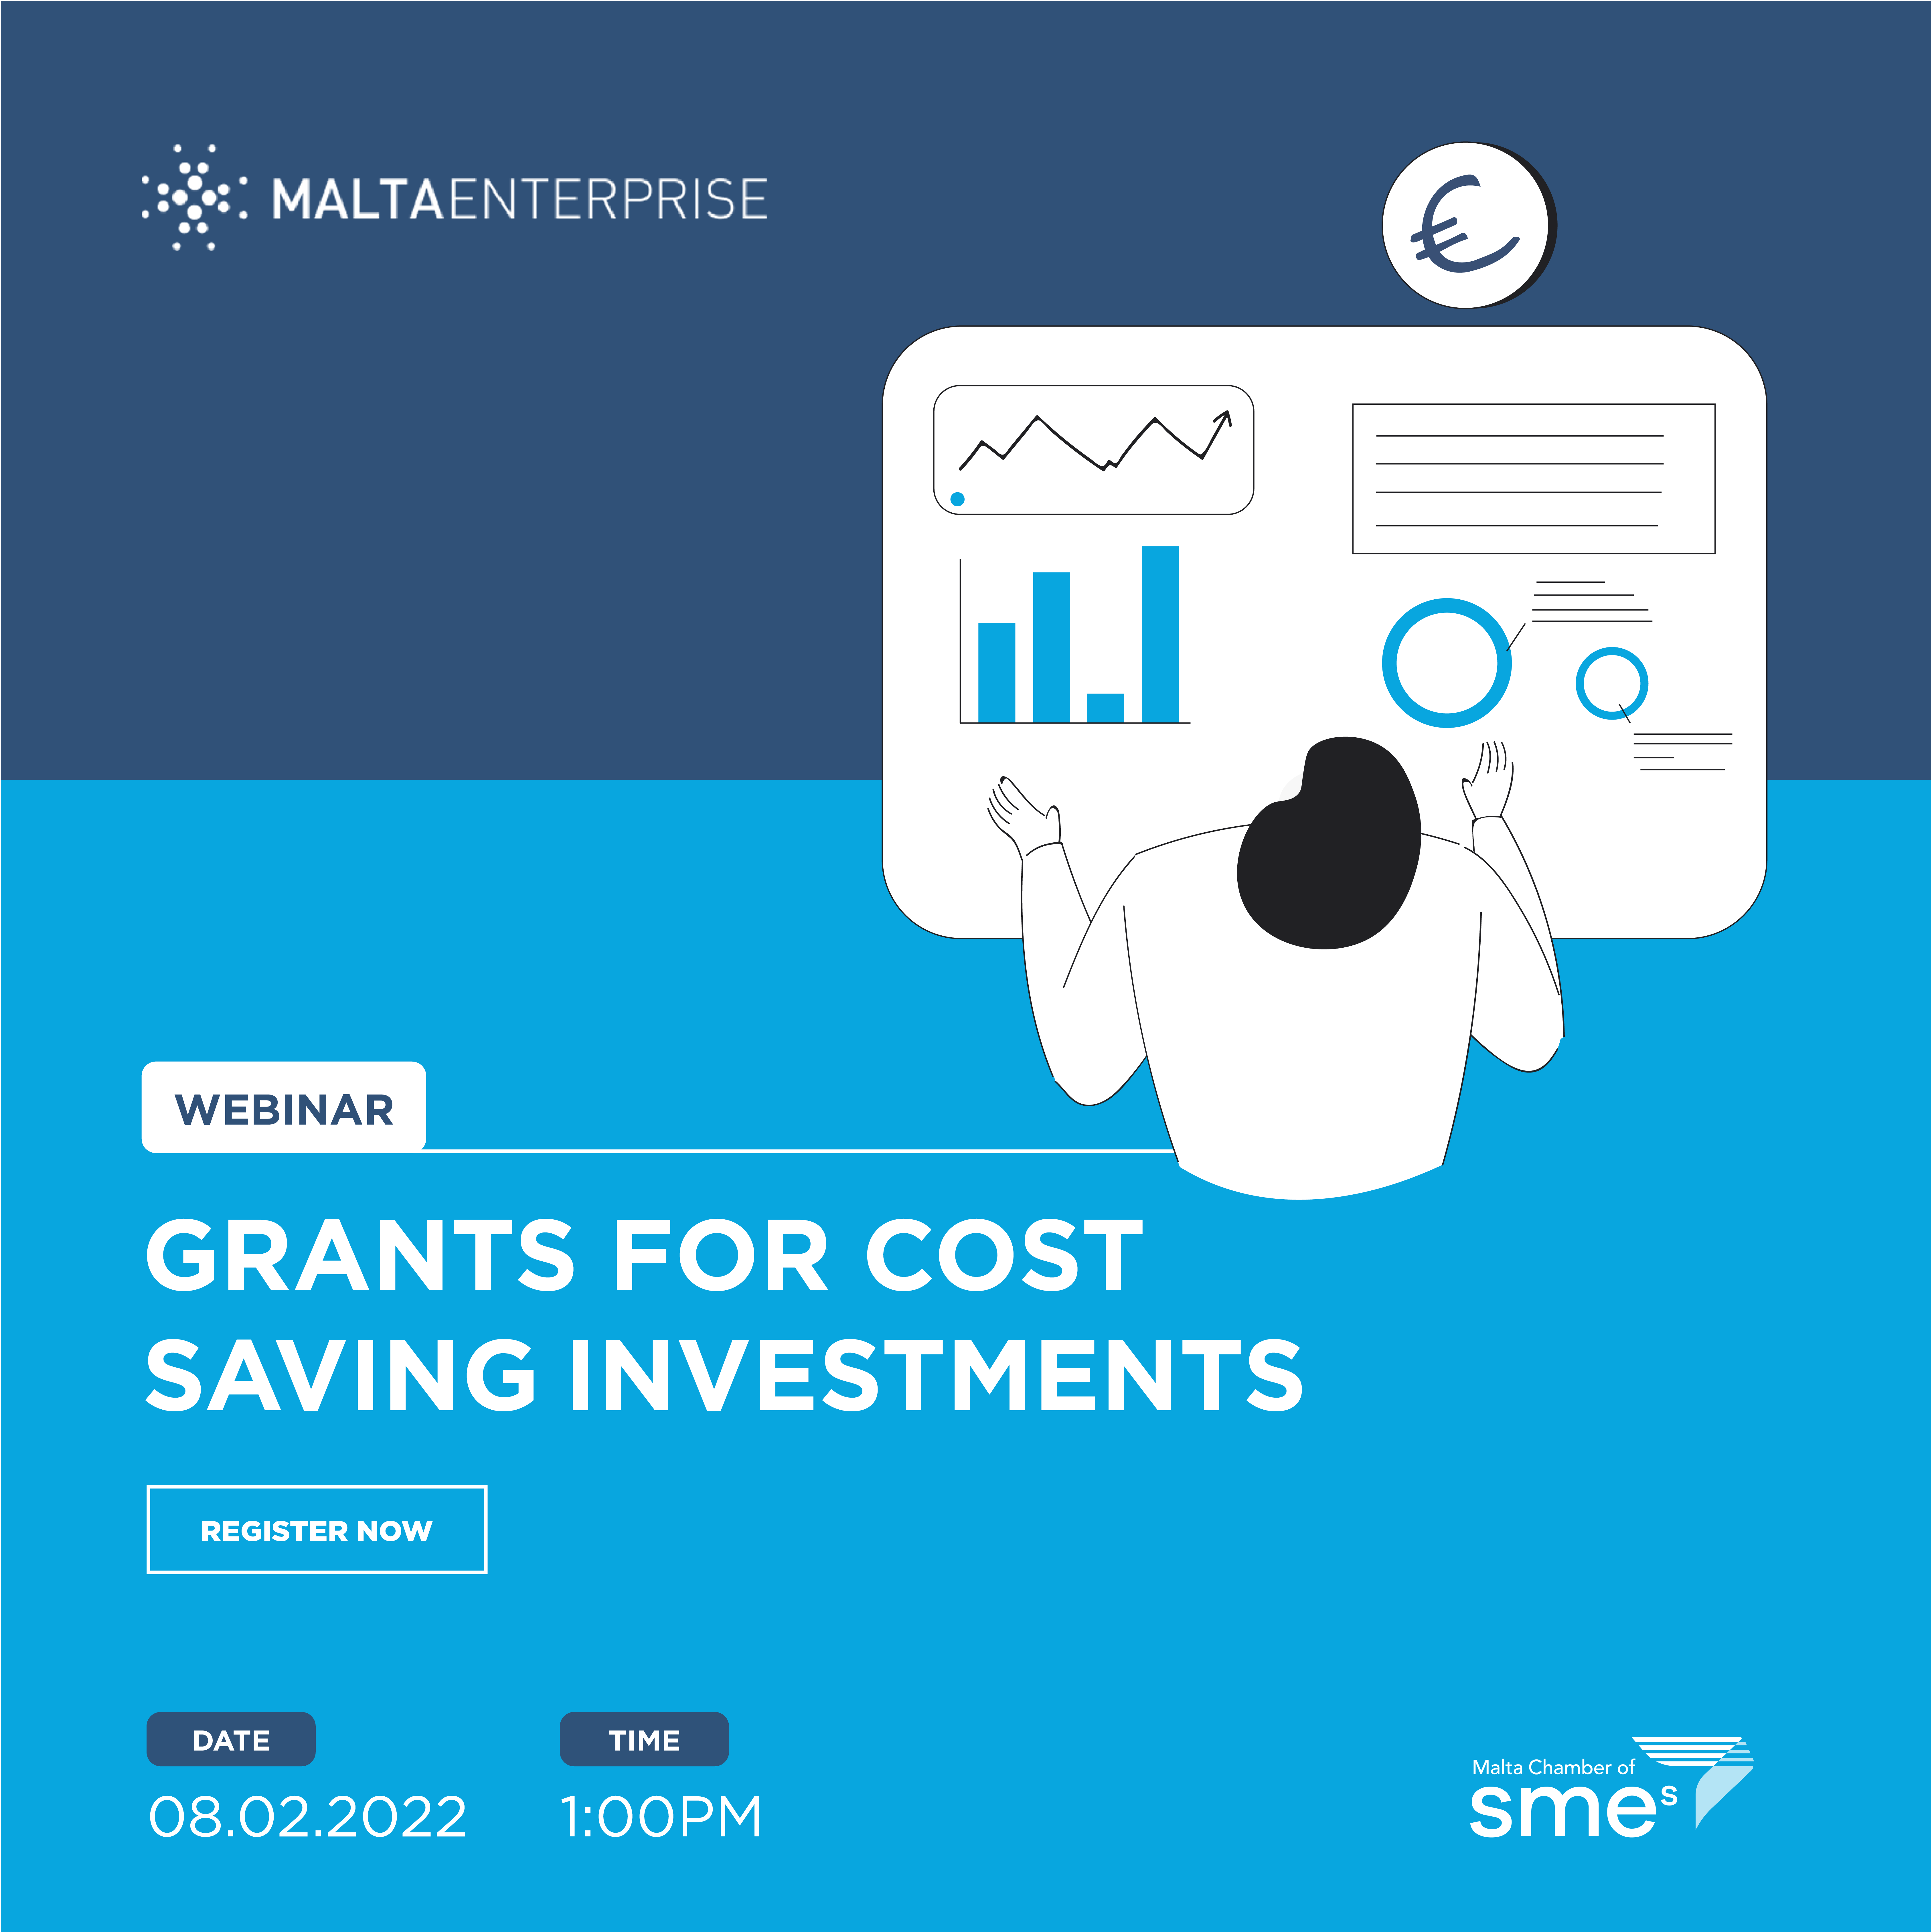 Webinar: Grants for cost saving investments